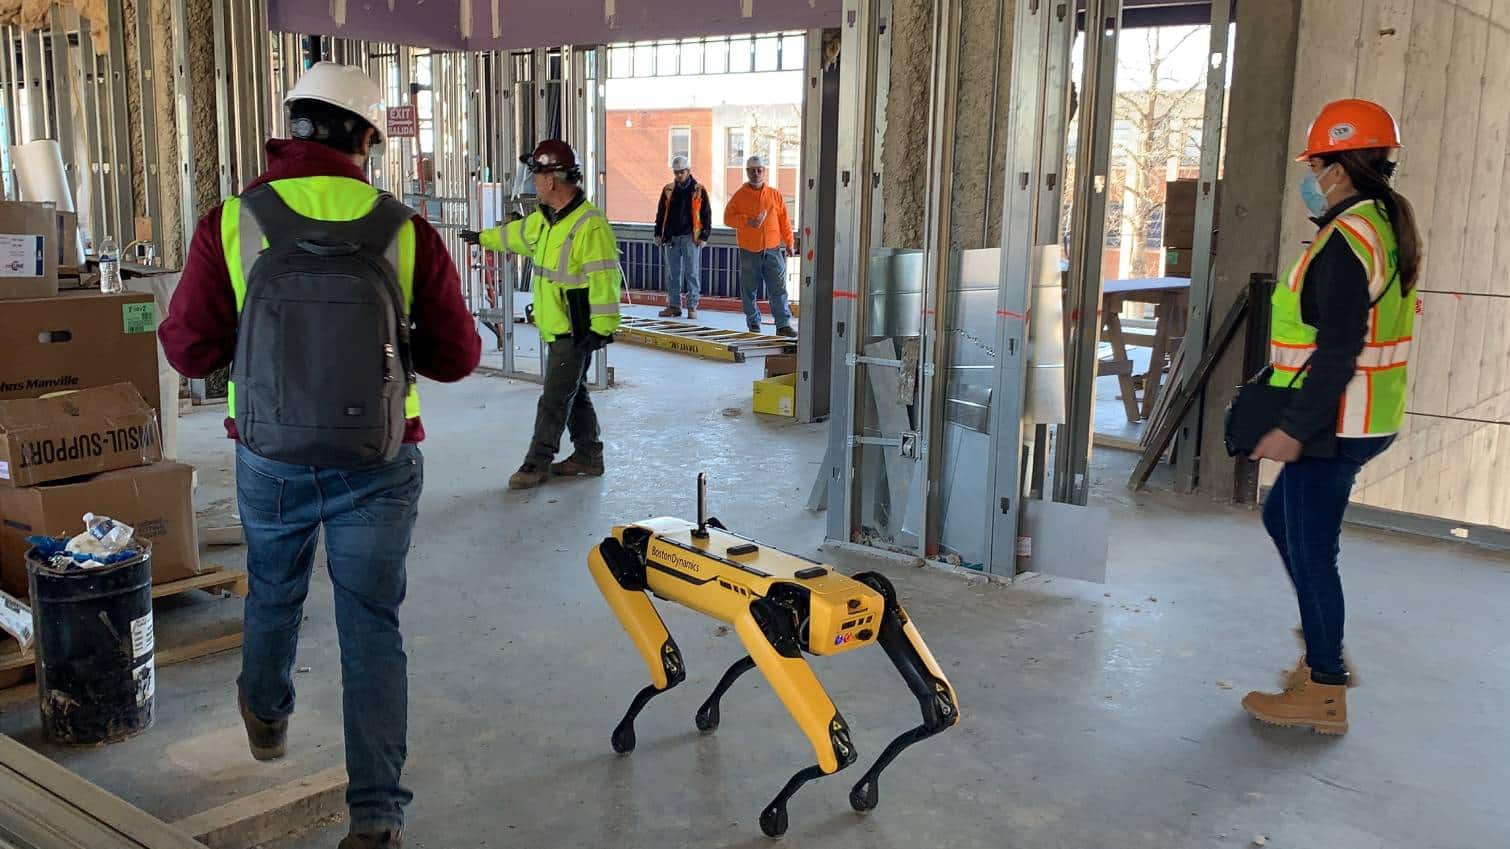 Spot with a 360° camera alongside workers on a construction site